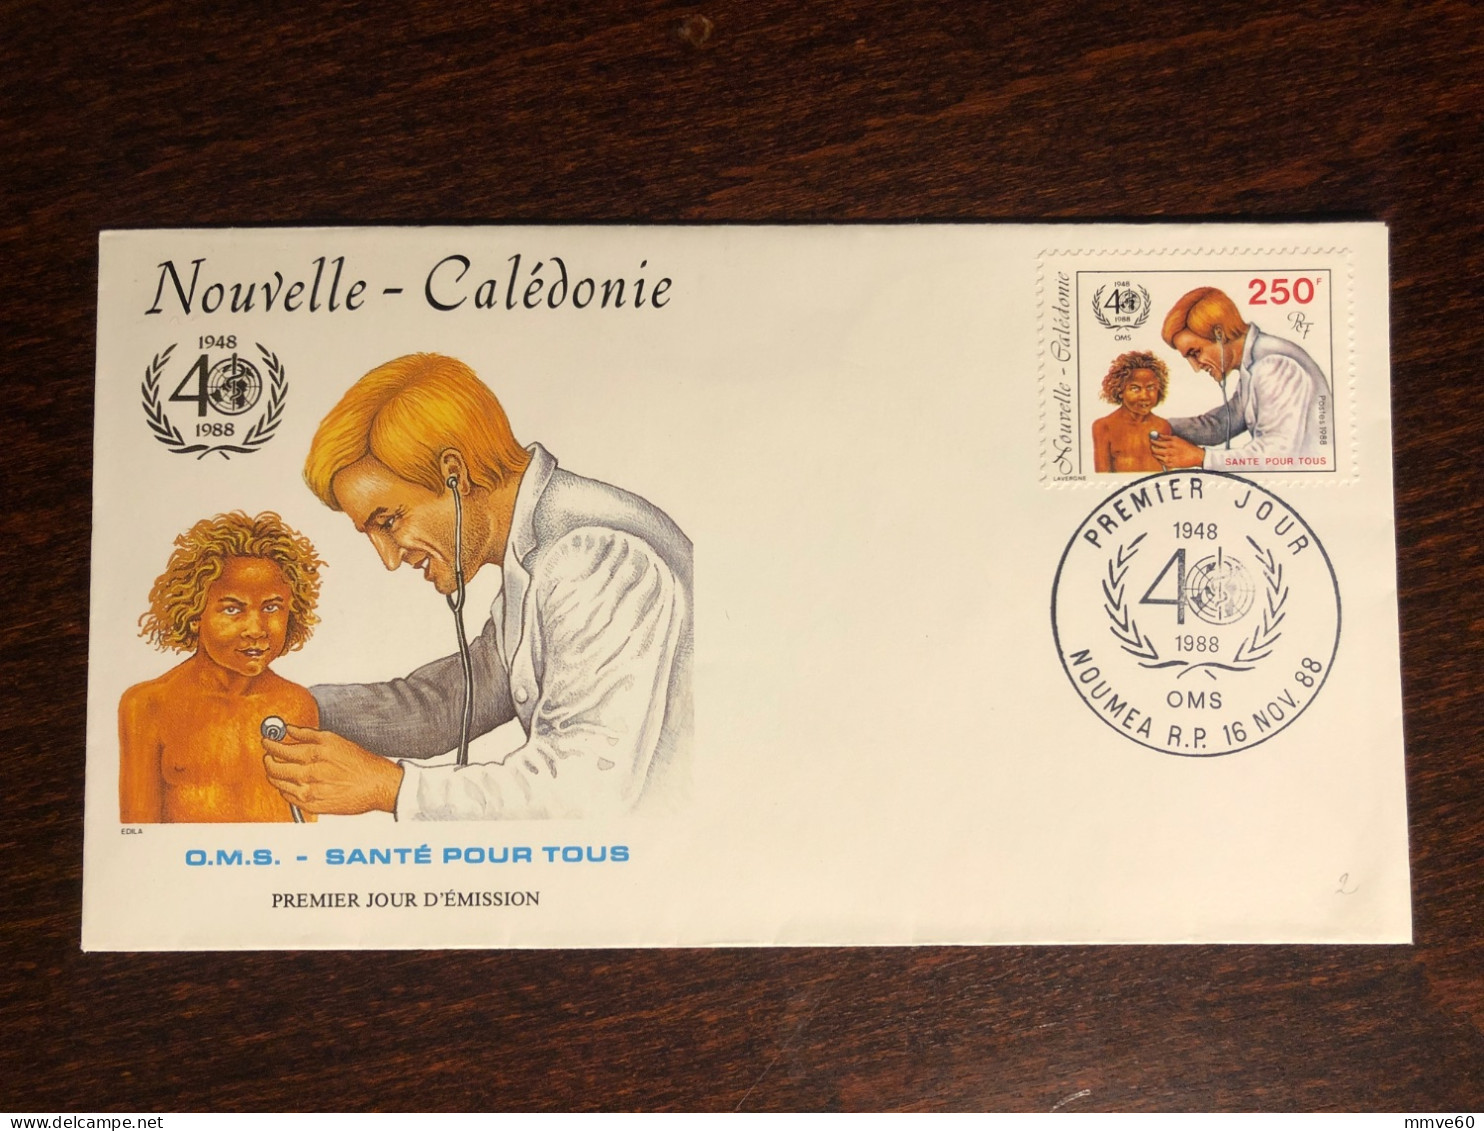 NEW CALEDONIA NOUVELLE CALEDONIE FDC COVER 1988 YEAR WHO HEALTH MEDICINE - Covers & Documents